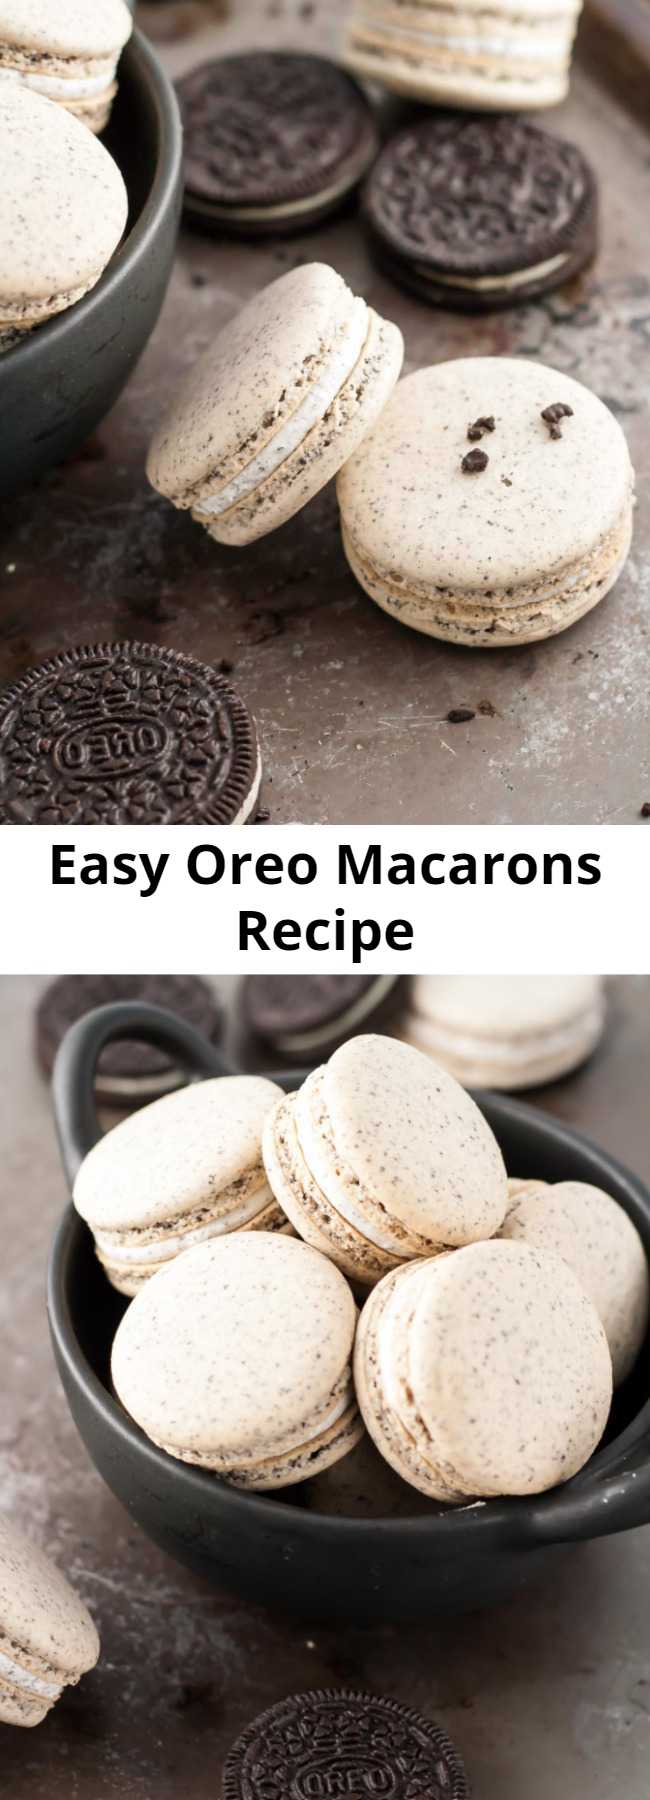 Easy Oreo Macarons Recipe - Turn your favourite store-bought classics into something even more decadent with these delicate Oreo macarons.